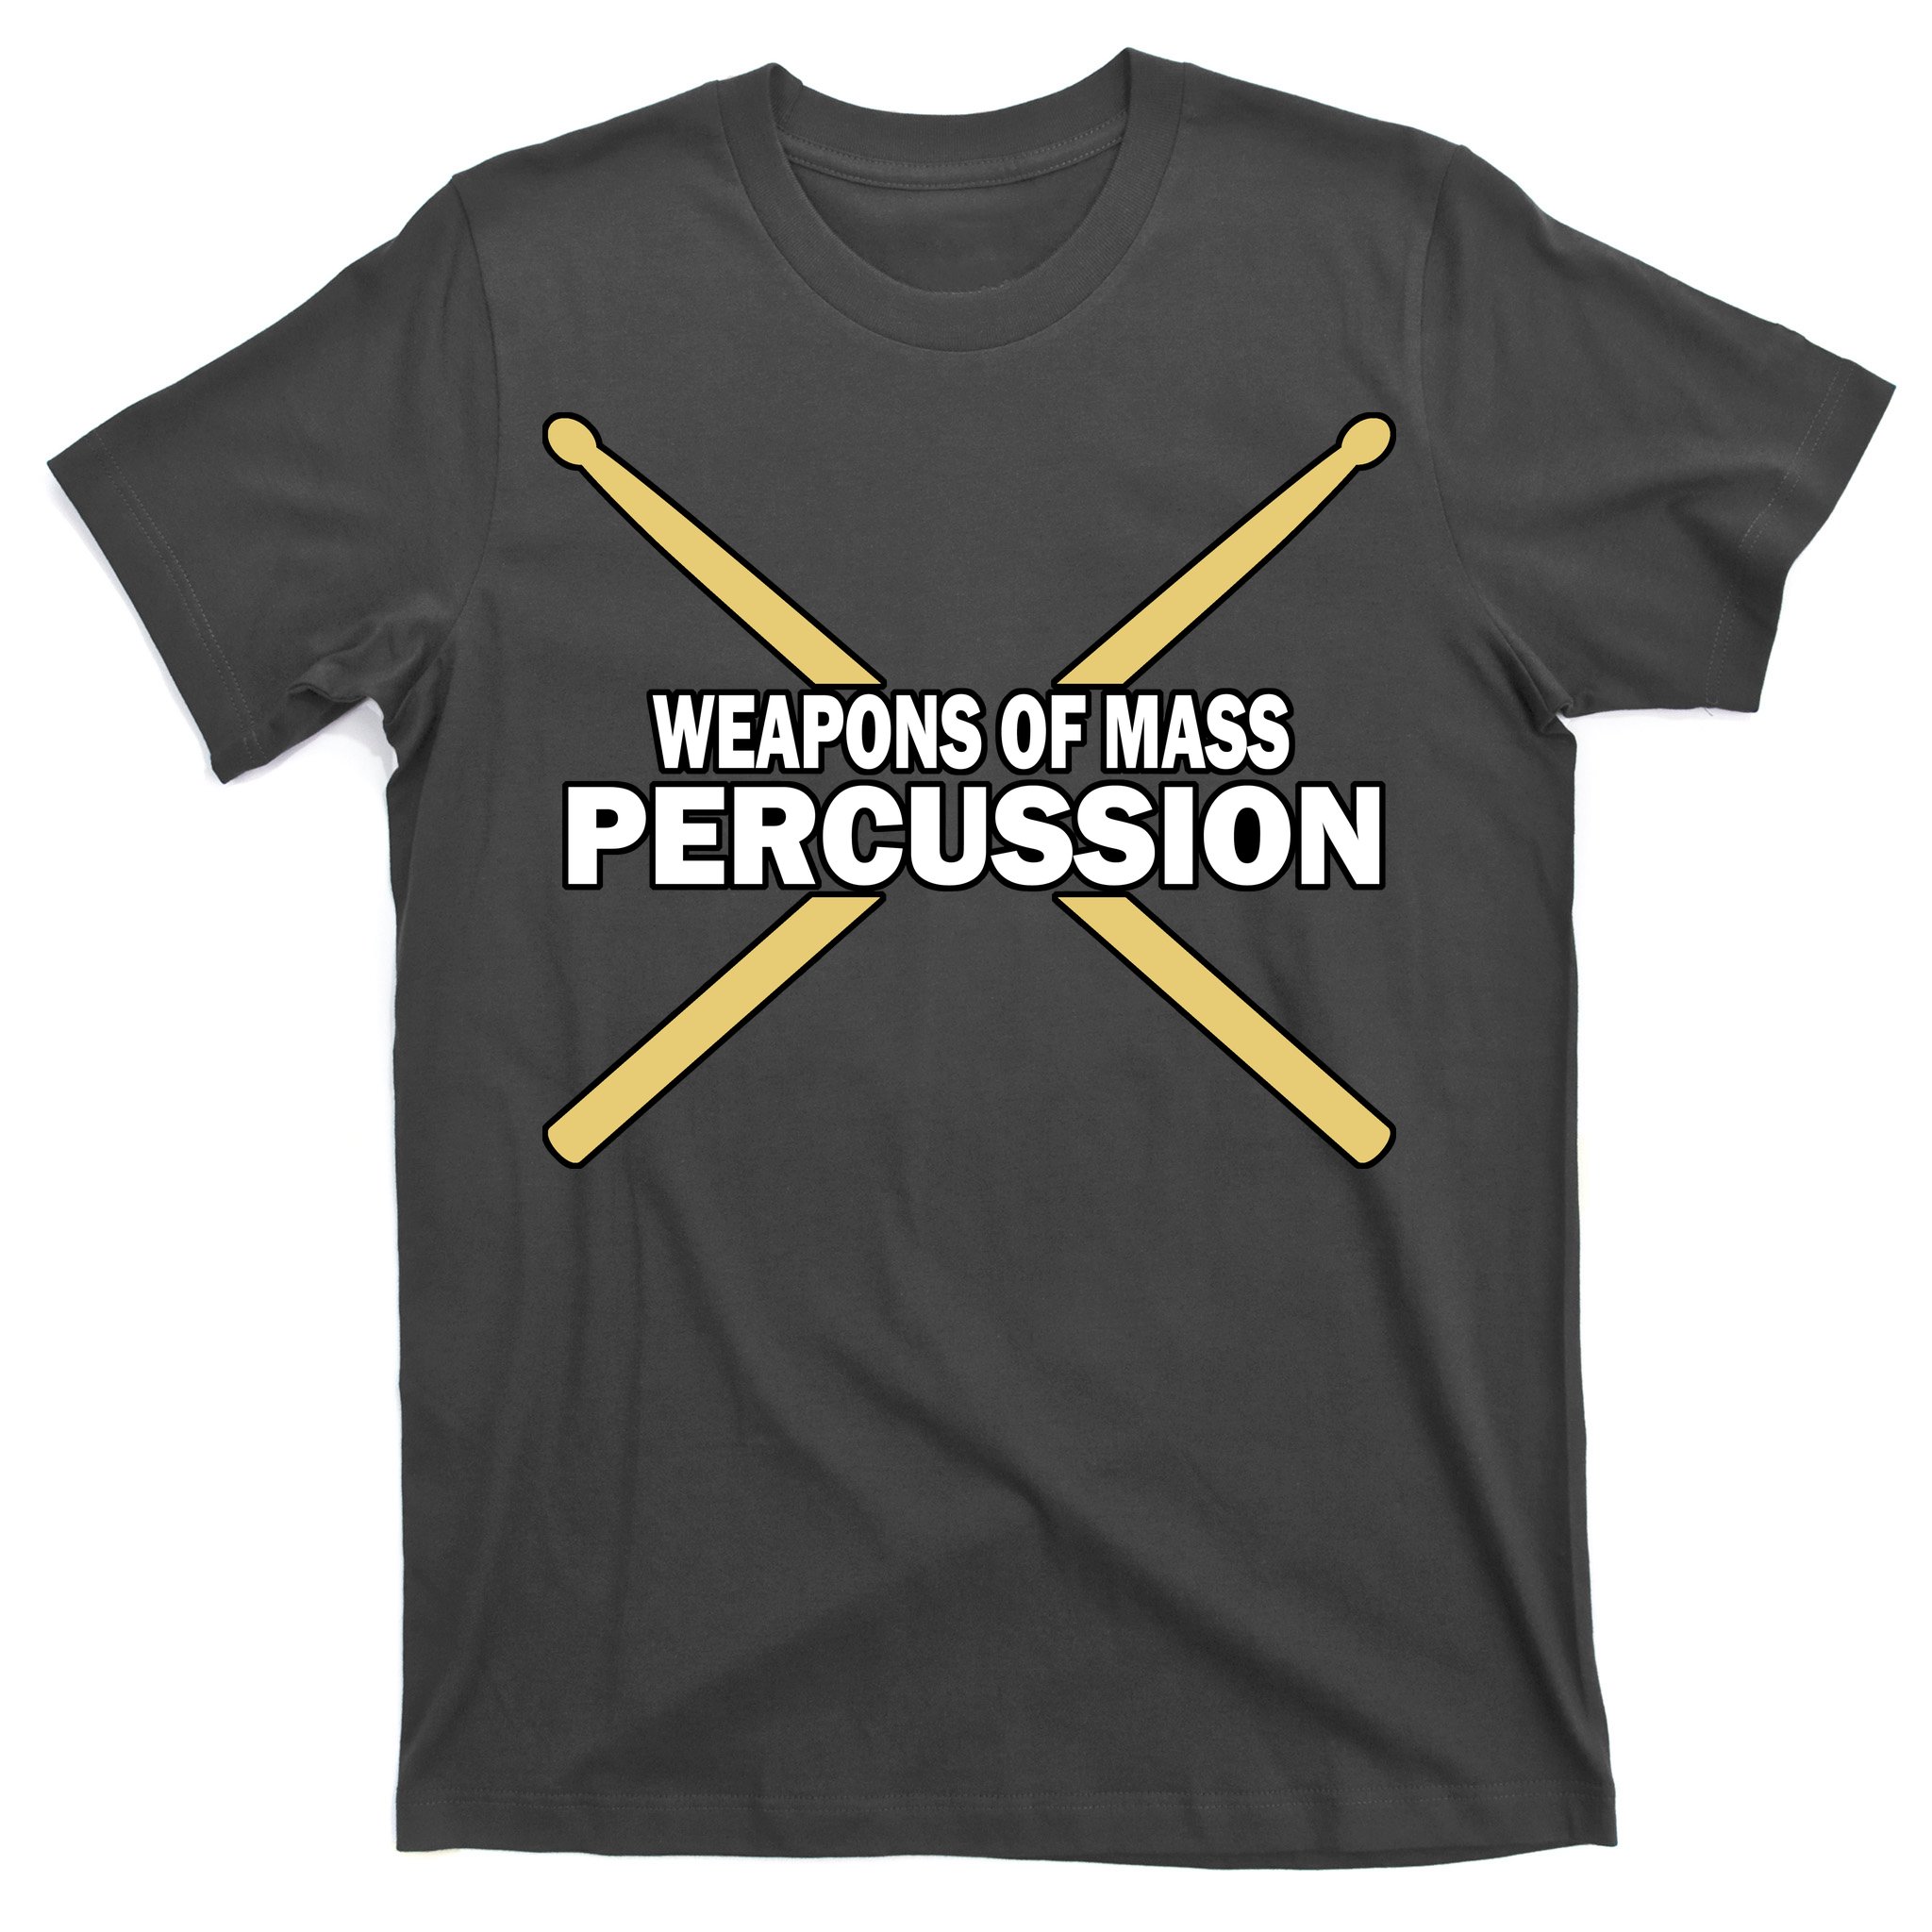 WEAPONS OF MASS PERCUSSION Drummer's Drum Sticks Youth T-Shirt 